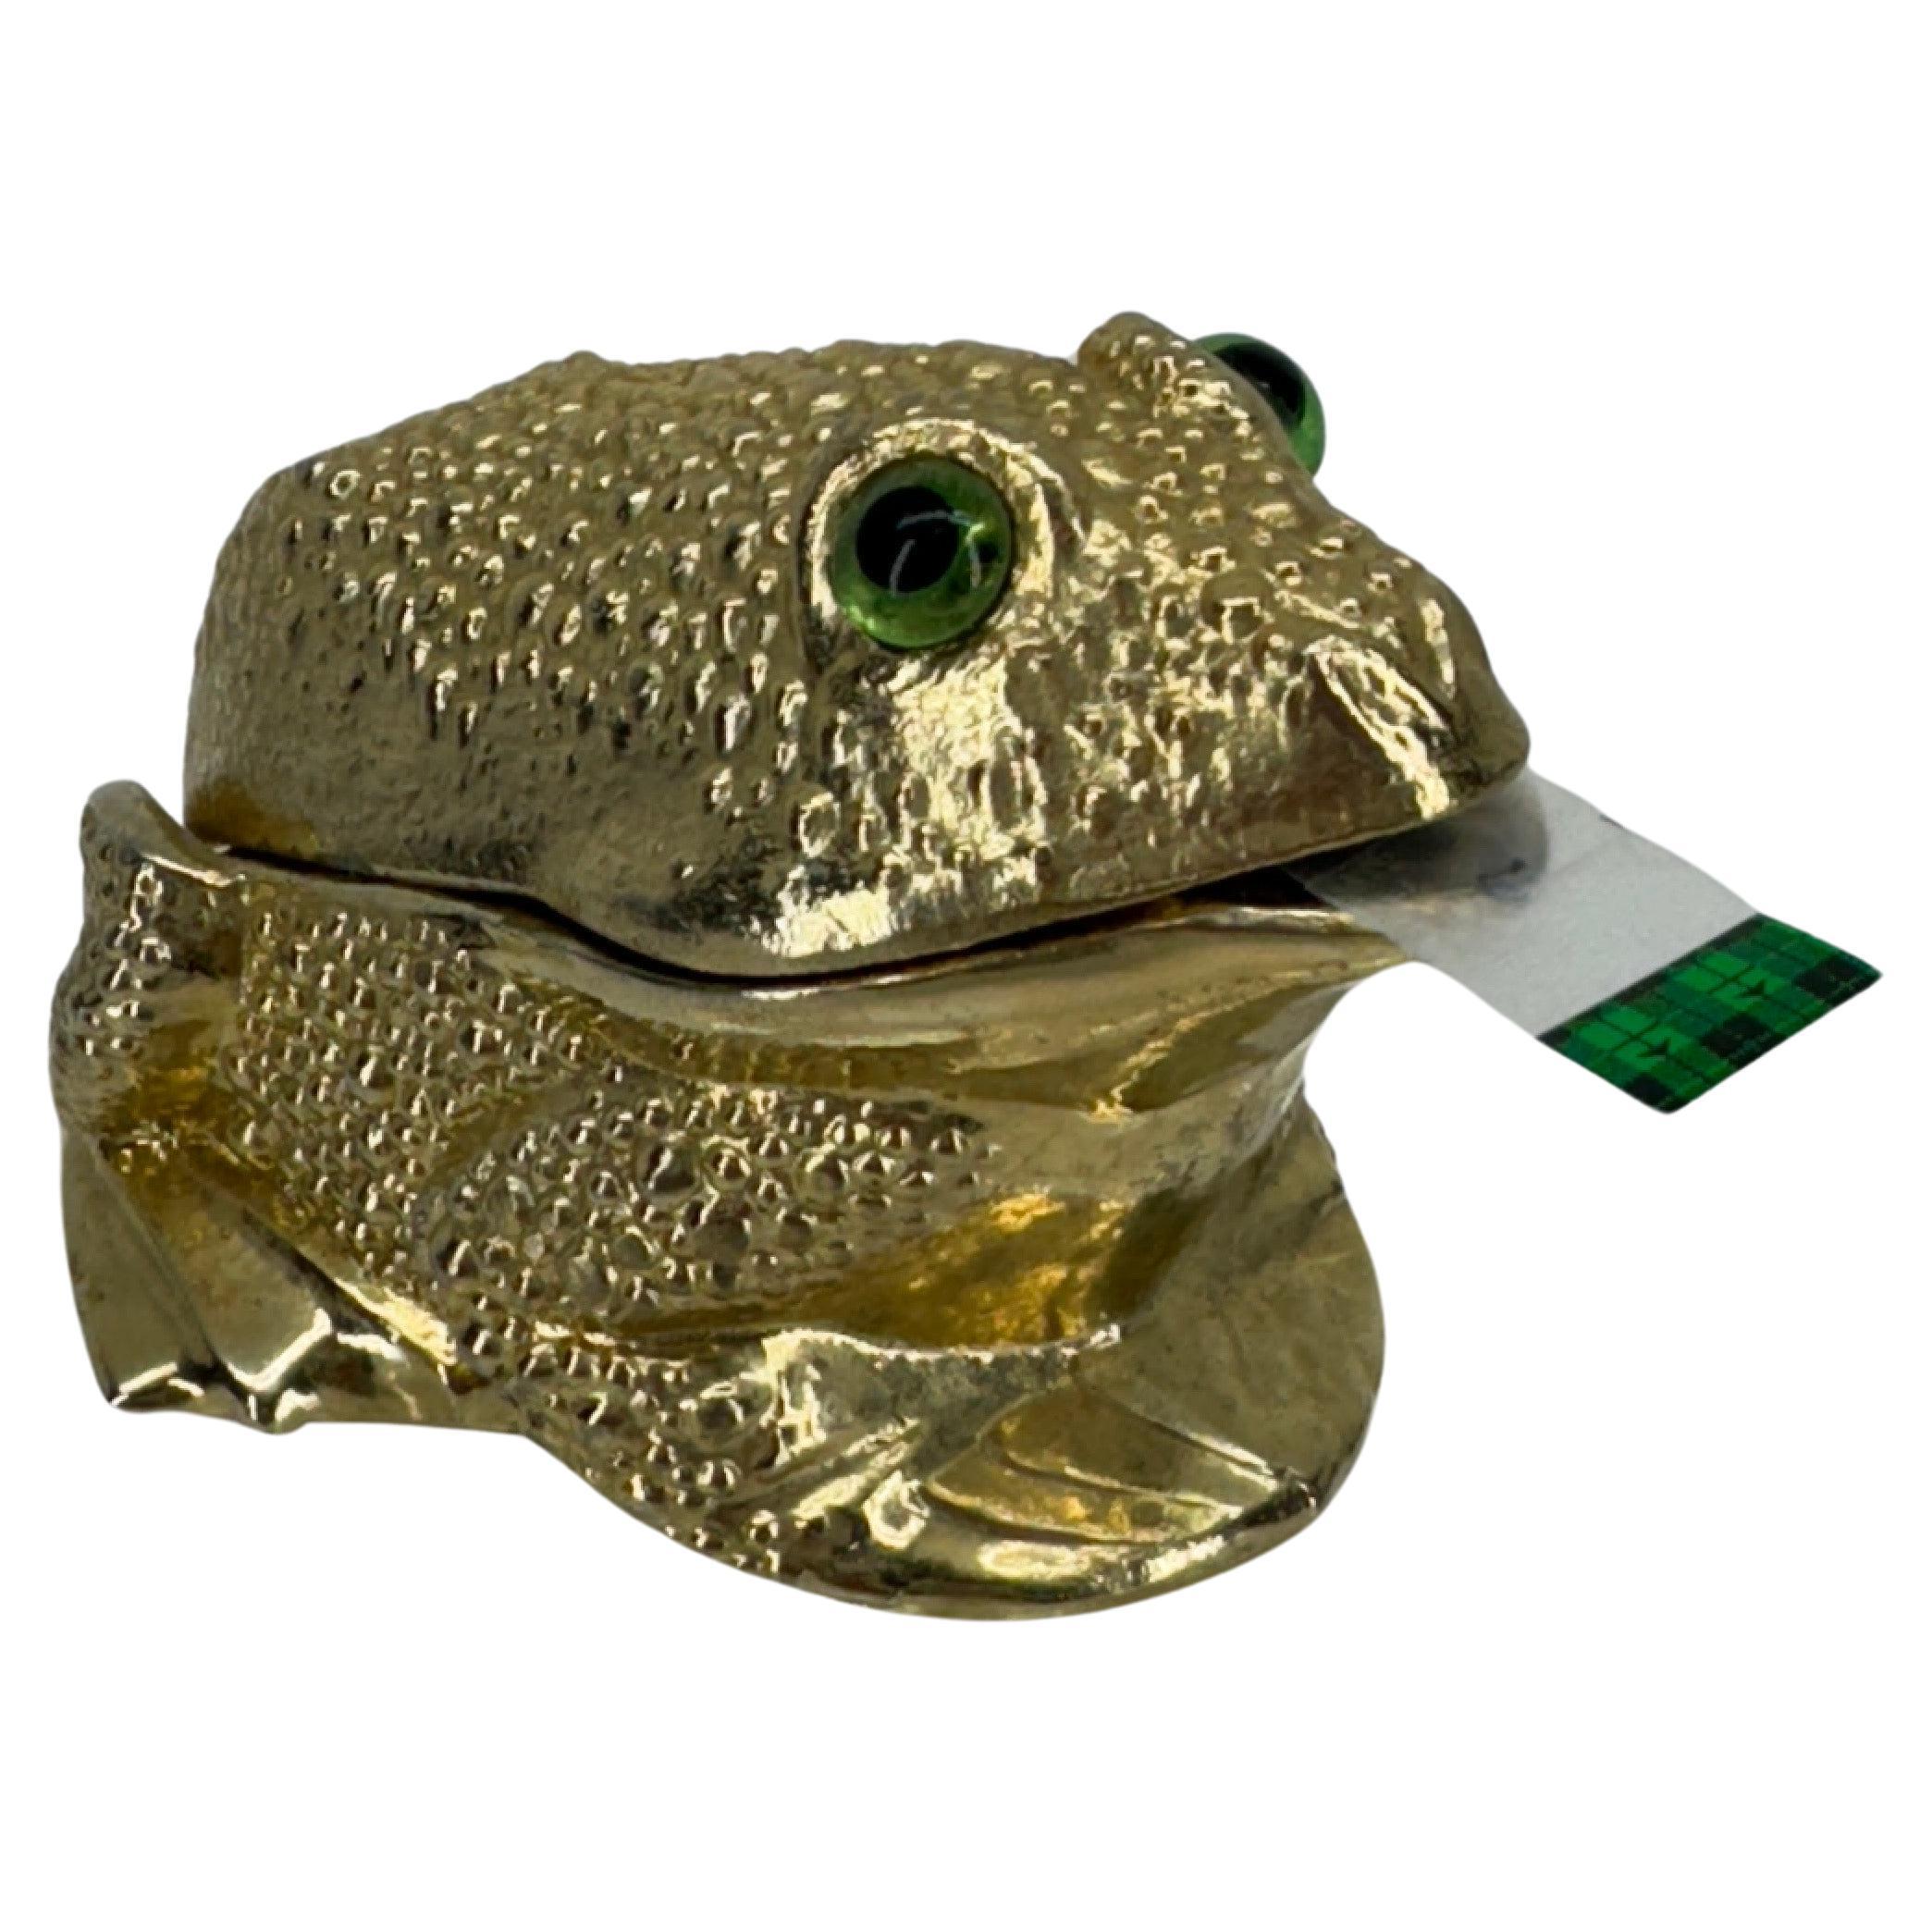 Textured Gold Tone Metal Frog Tape Dispenser, 1960's

This vintage two piece tape dispenser is from Ted Arnold Ltd. The charming frog with green glass eyes is stamped on the inside lid. This frog is a fantastic functional piece to add to a